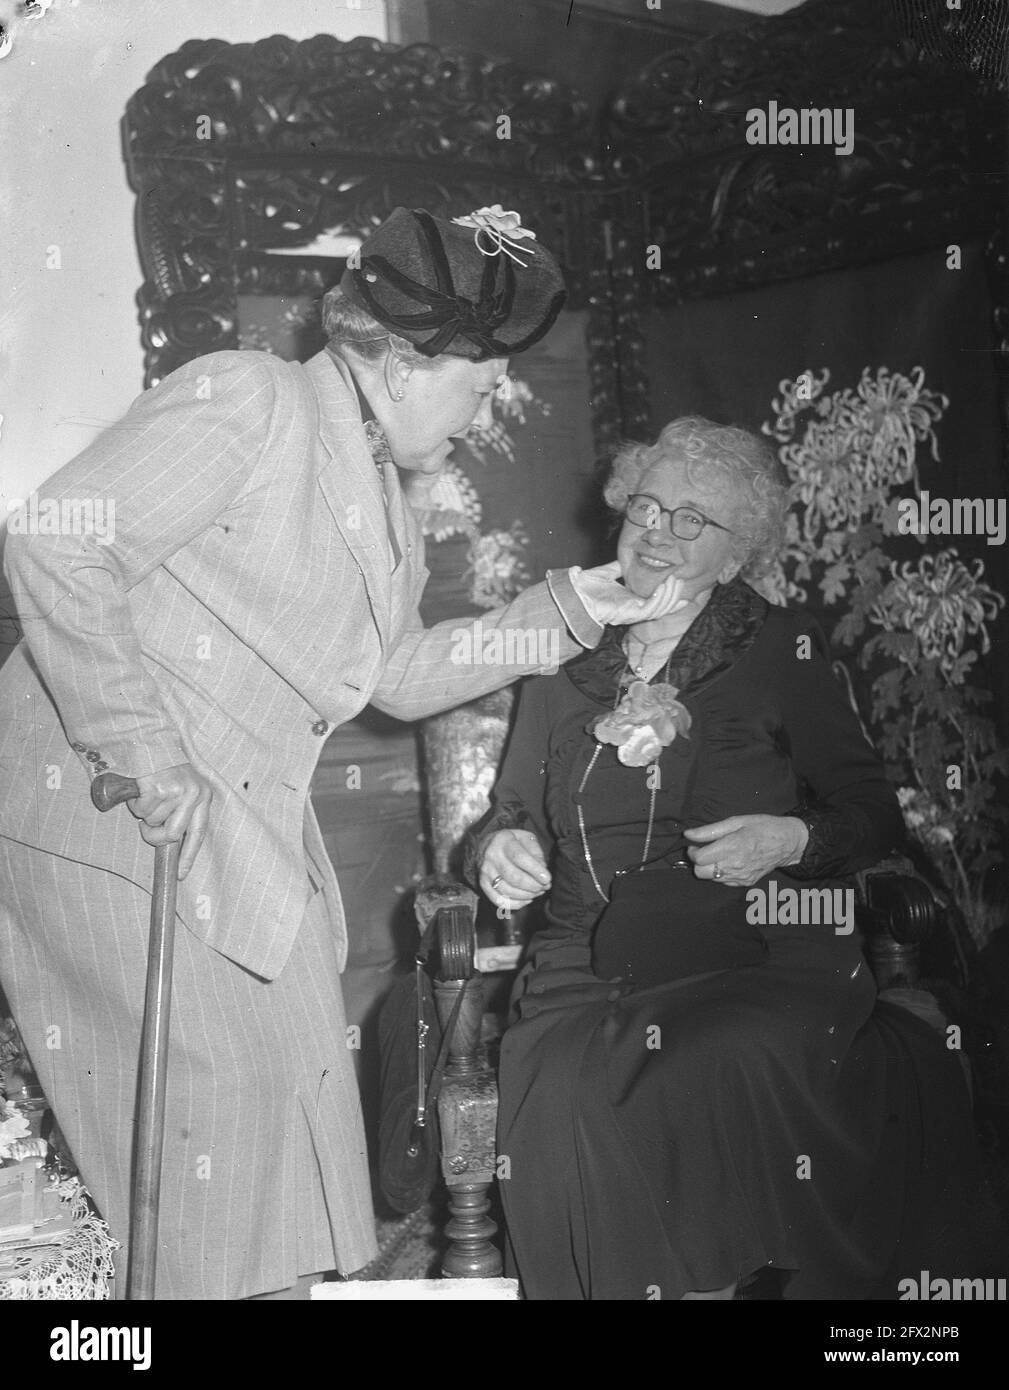 Marie van Zeggelen 80 years with R. Hoffen (= Rika Hopper), July 8, 1950, The Netherlands, 20th century press agency photo, news to remember, documentary, historic photography 1945-1990, visual stories, human history of the Twentieth Century, capturing moments in time Stock Photo